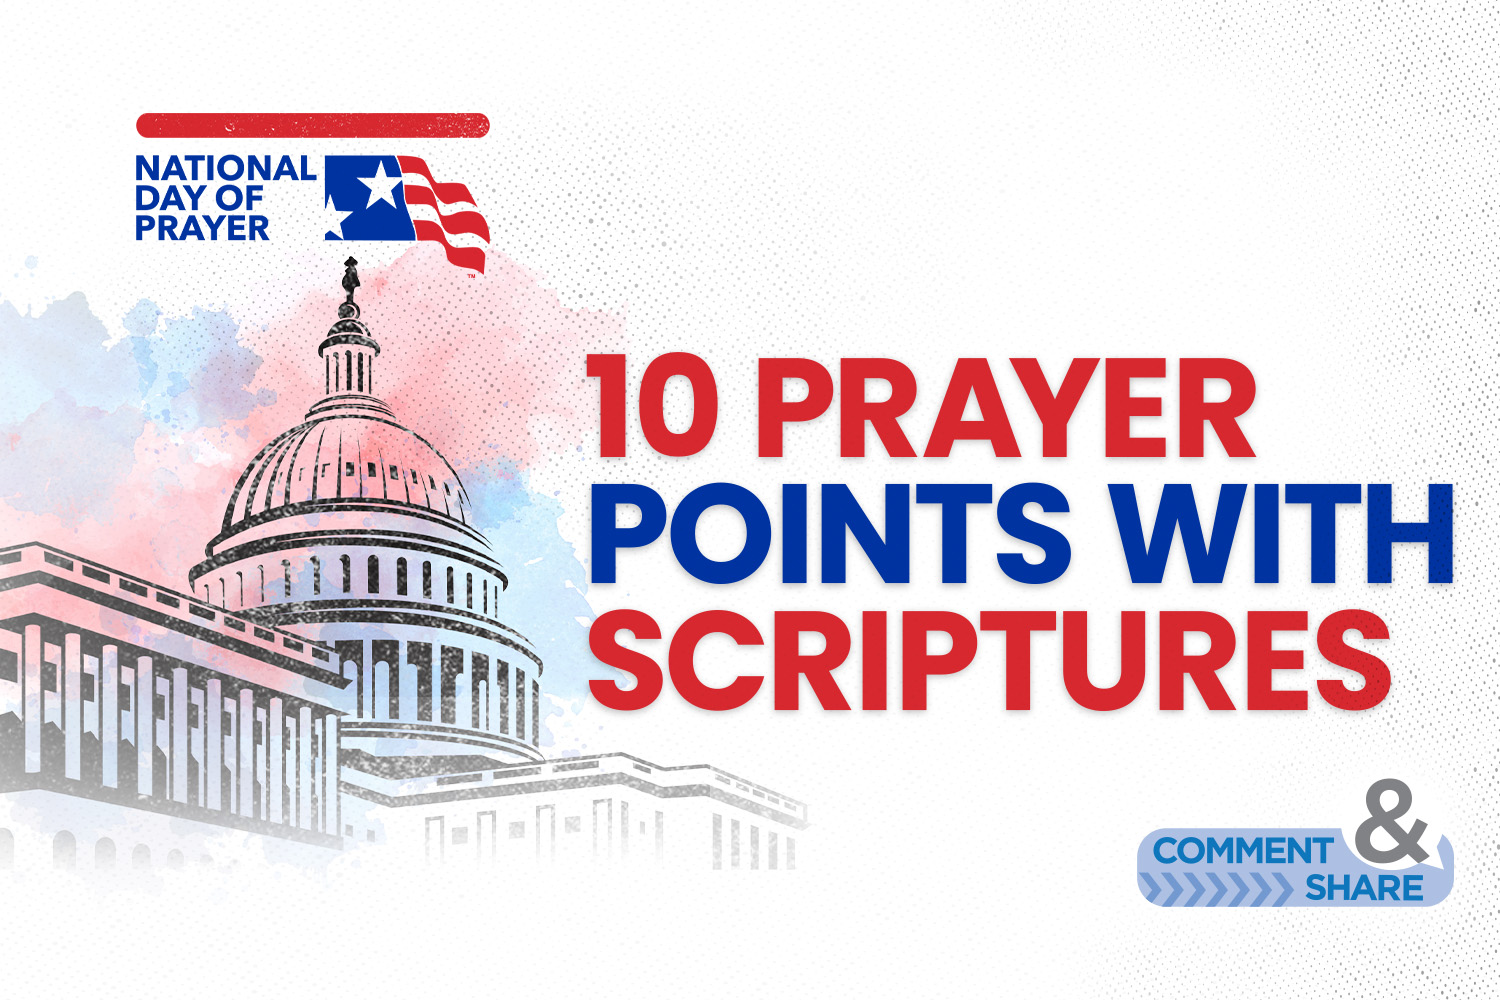 60 Bible Verses About the Power and Important of Prayer